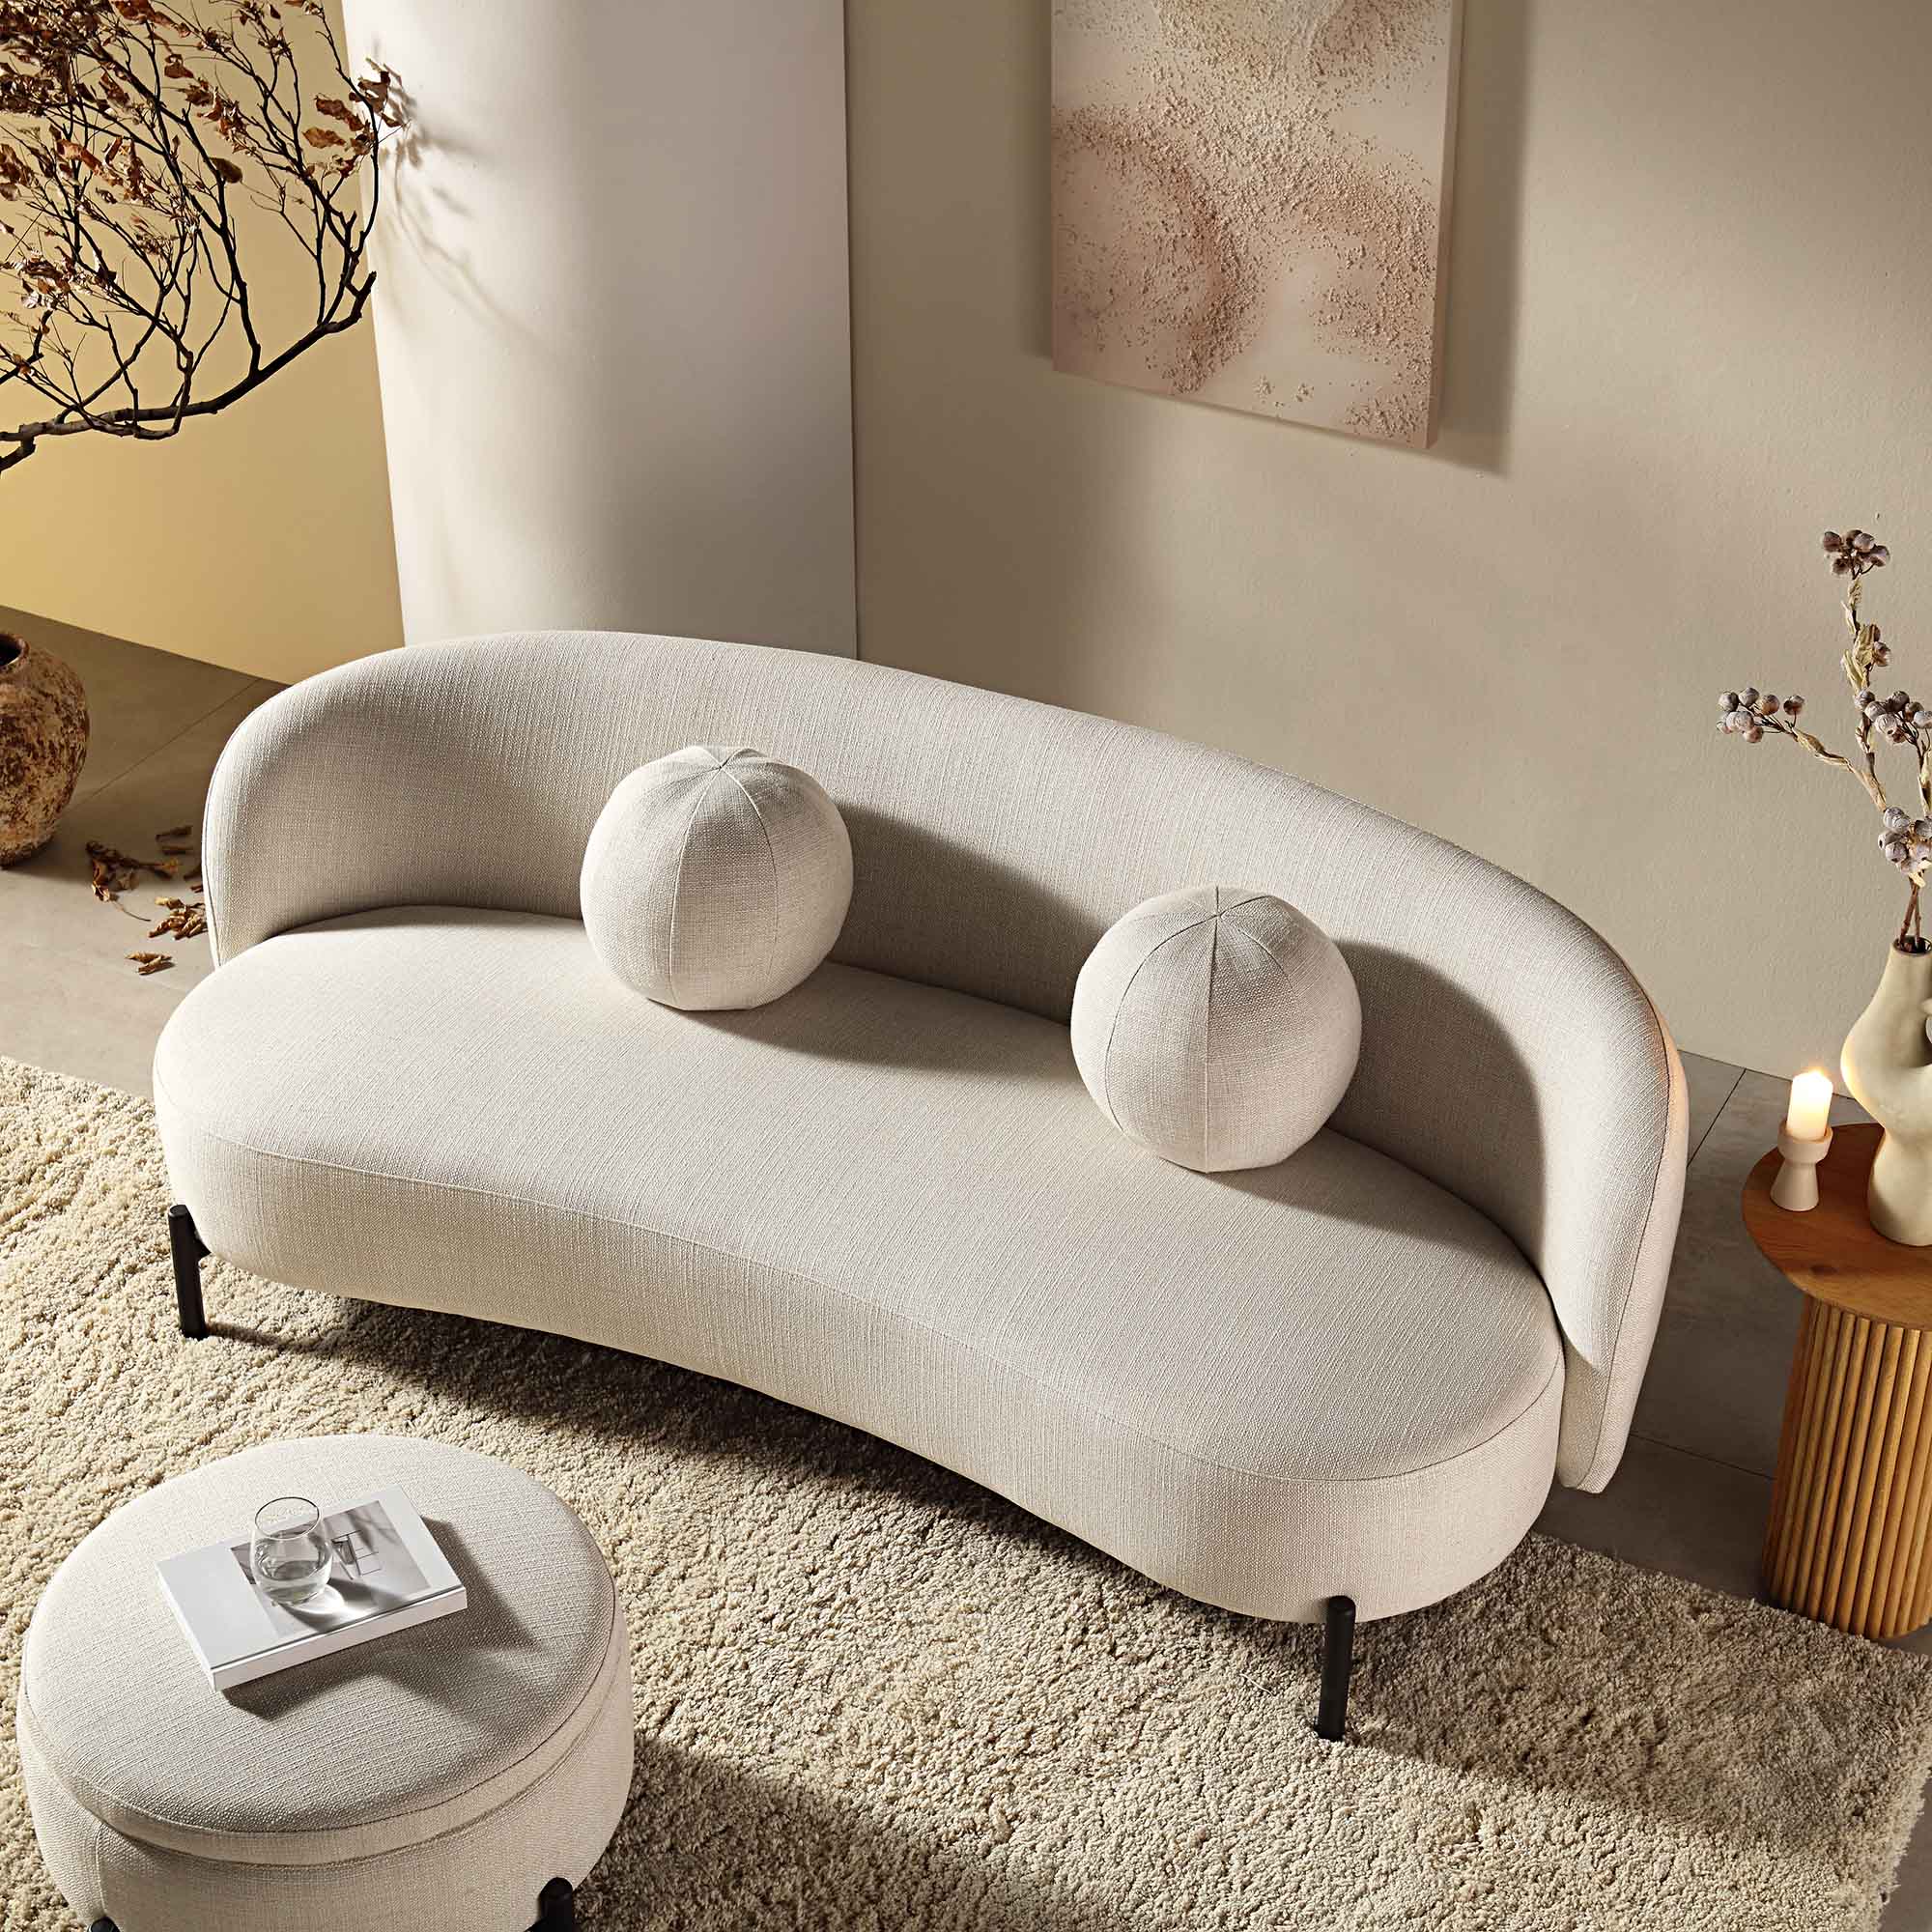 Amboise 3-Seater Curved Sofa with Ball Cushions, Beige Linen Blend